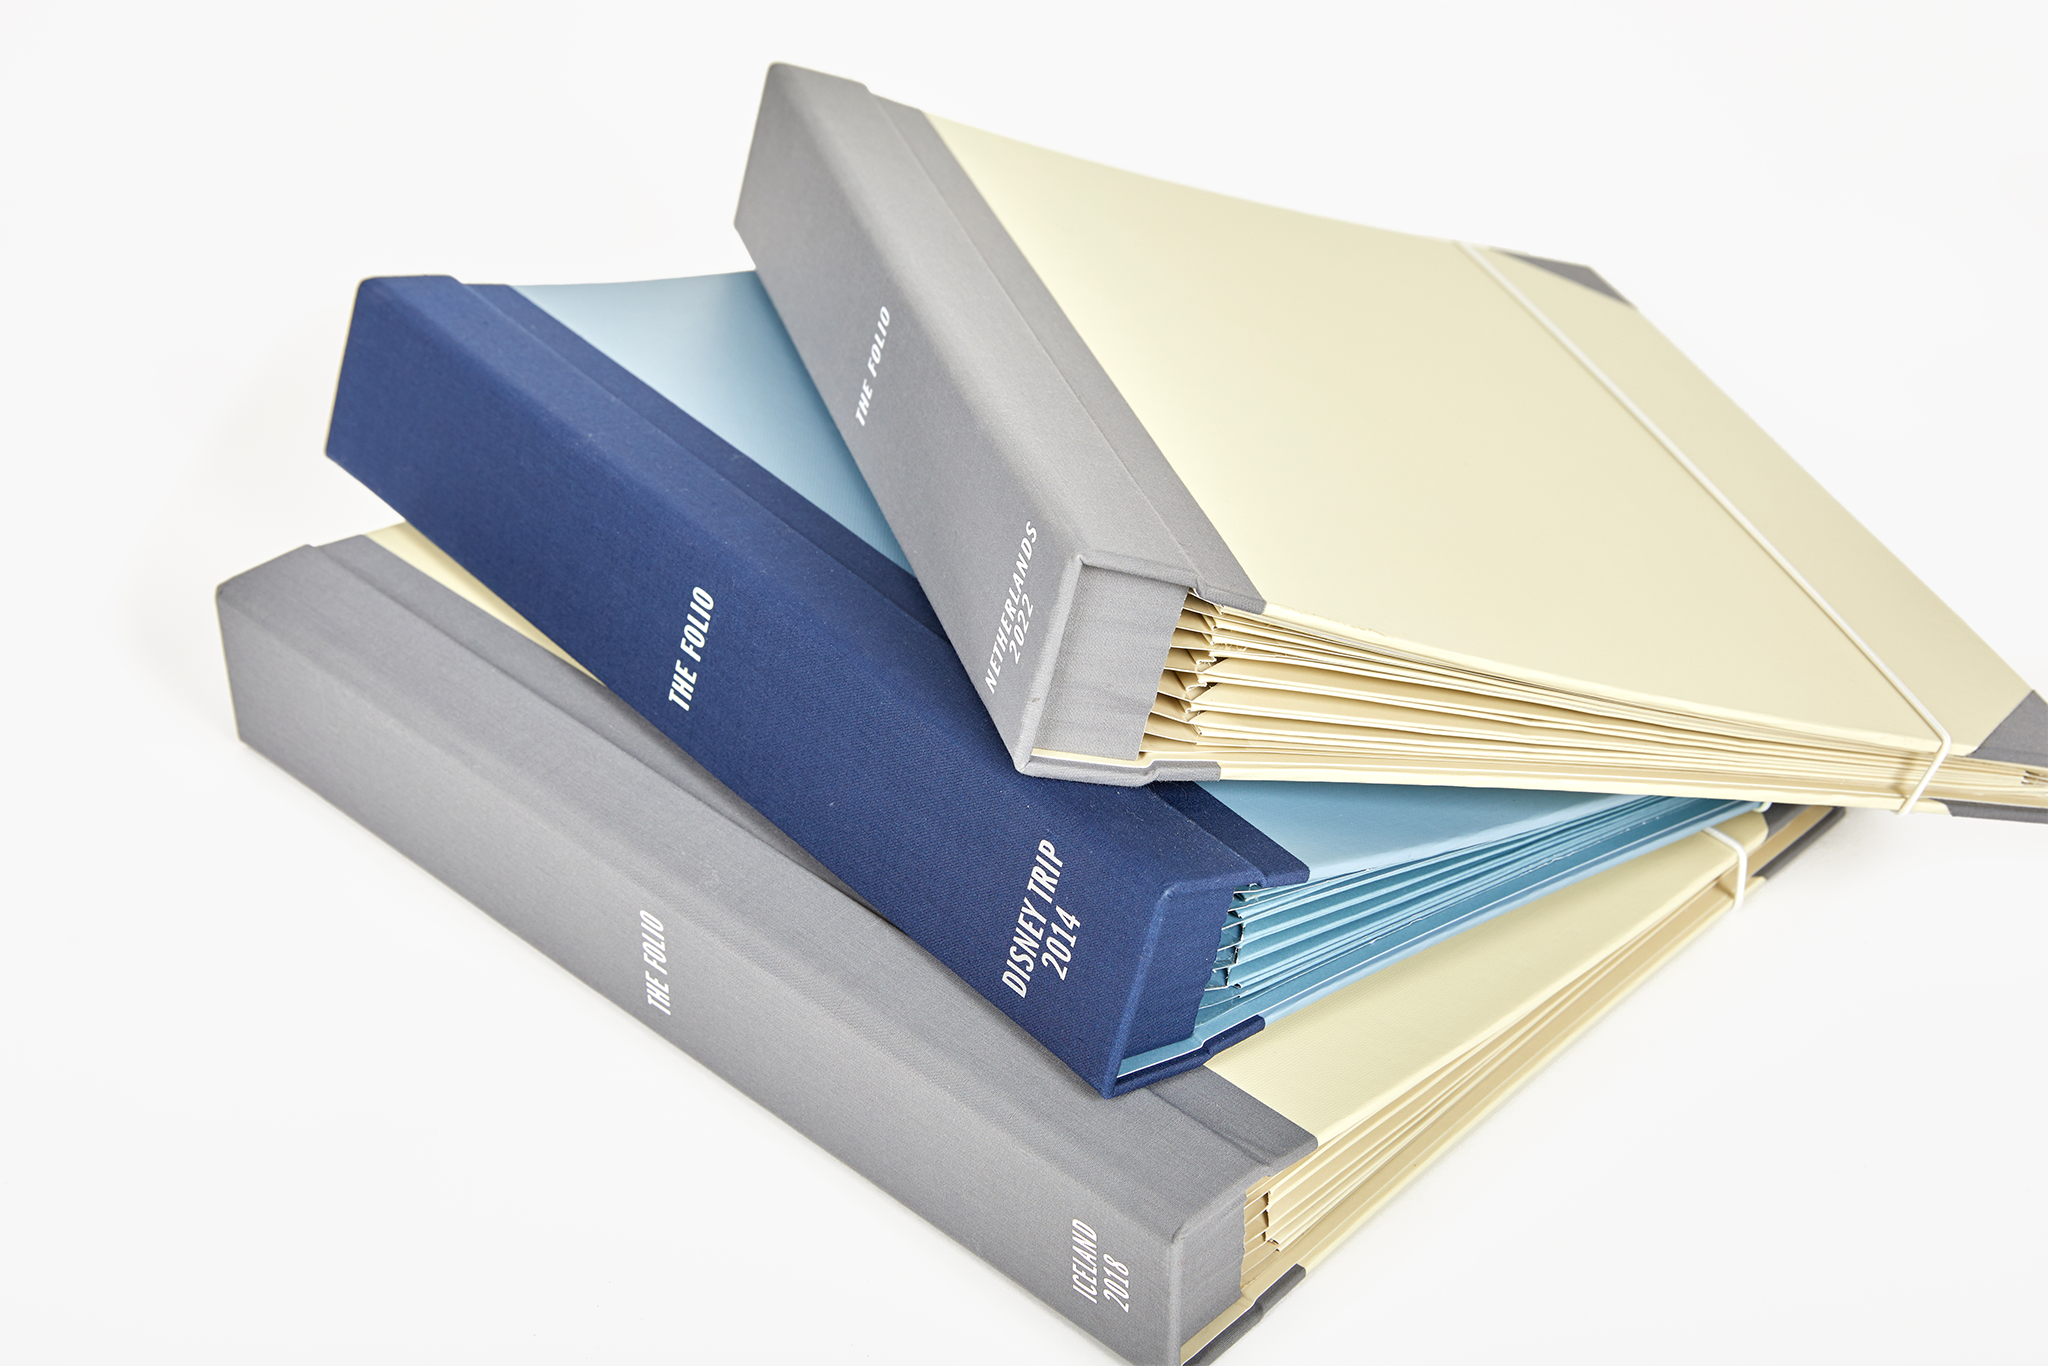 three piled up travel binders with personalizations. Two are slate and one is something blue